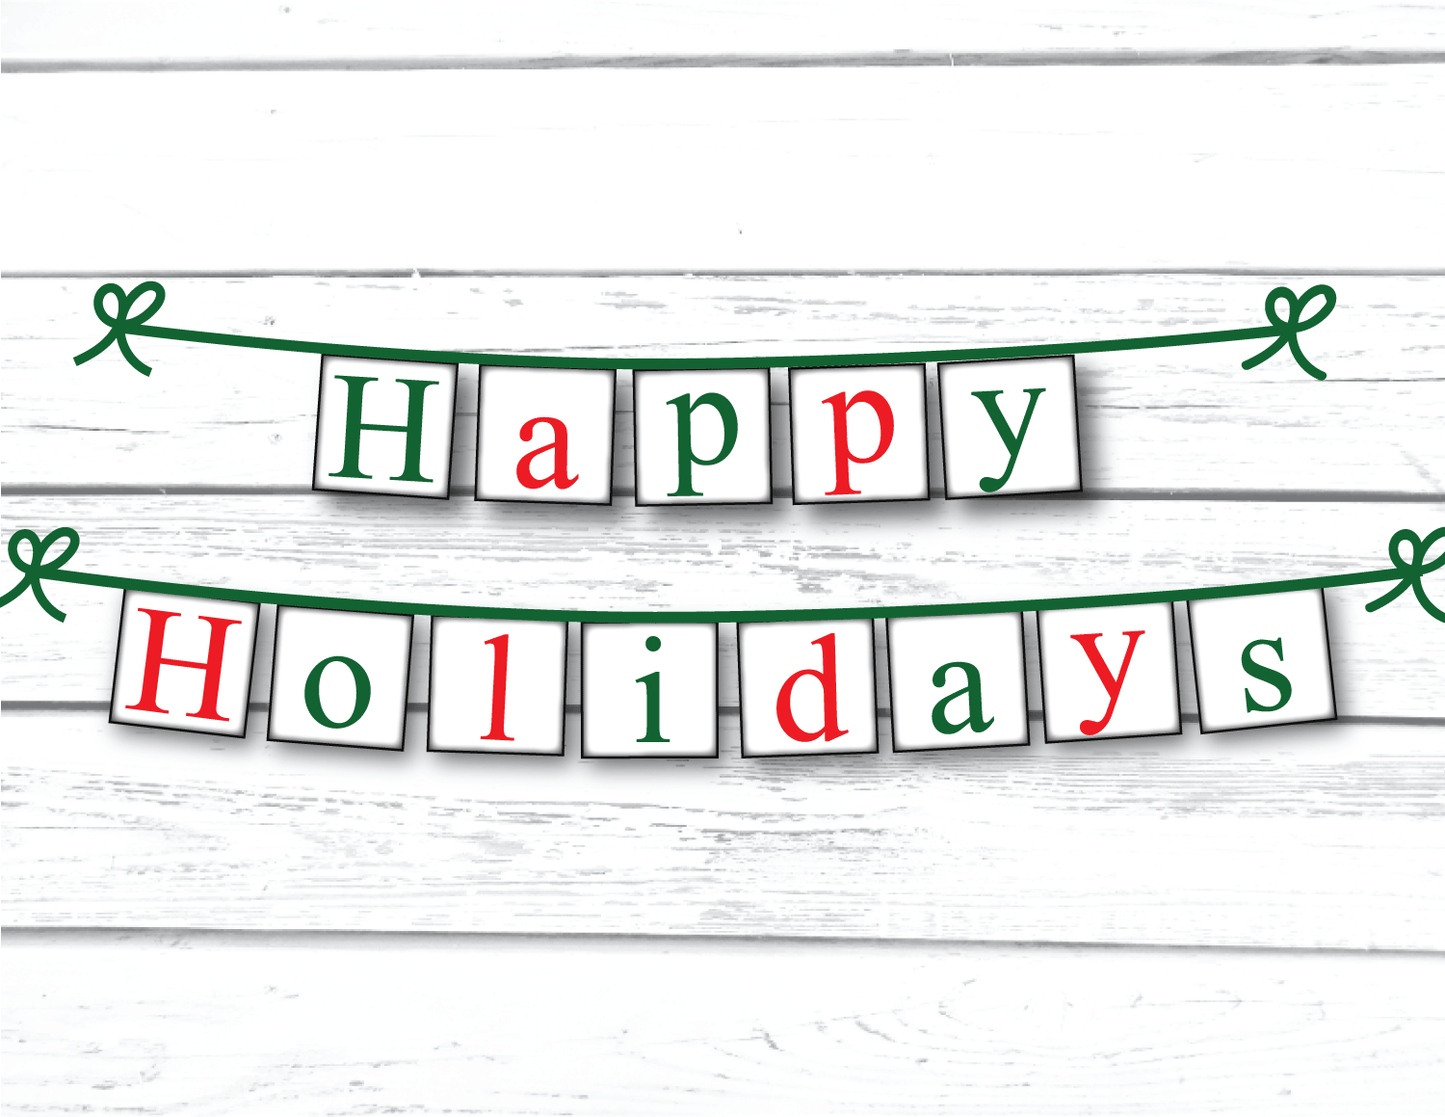 happy holidays banner with red and green letters - festive holiday decor - Celebrating Together